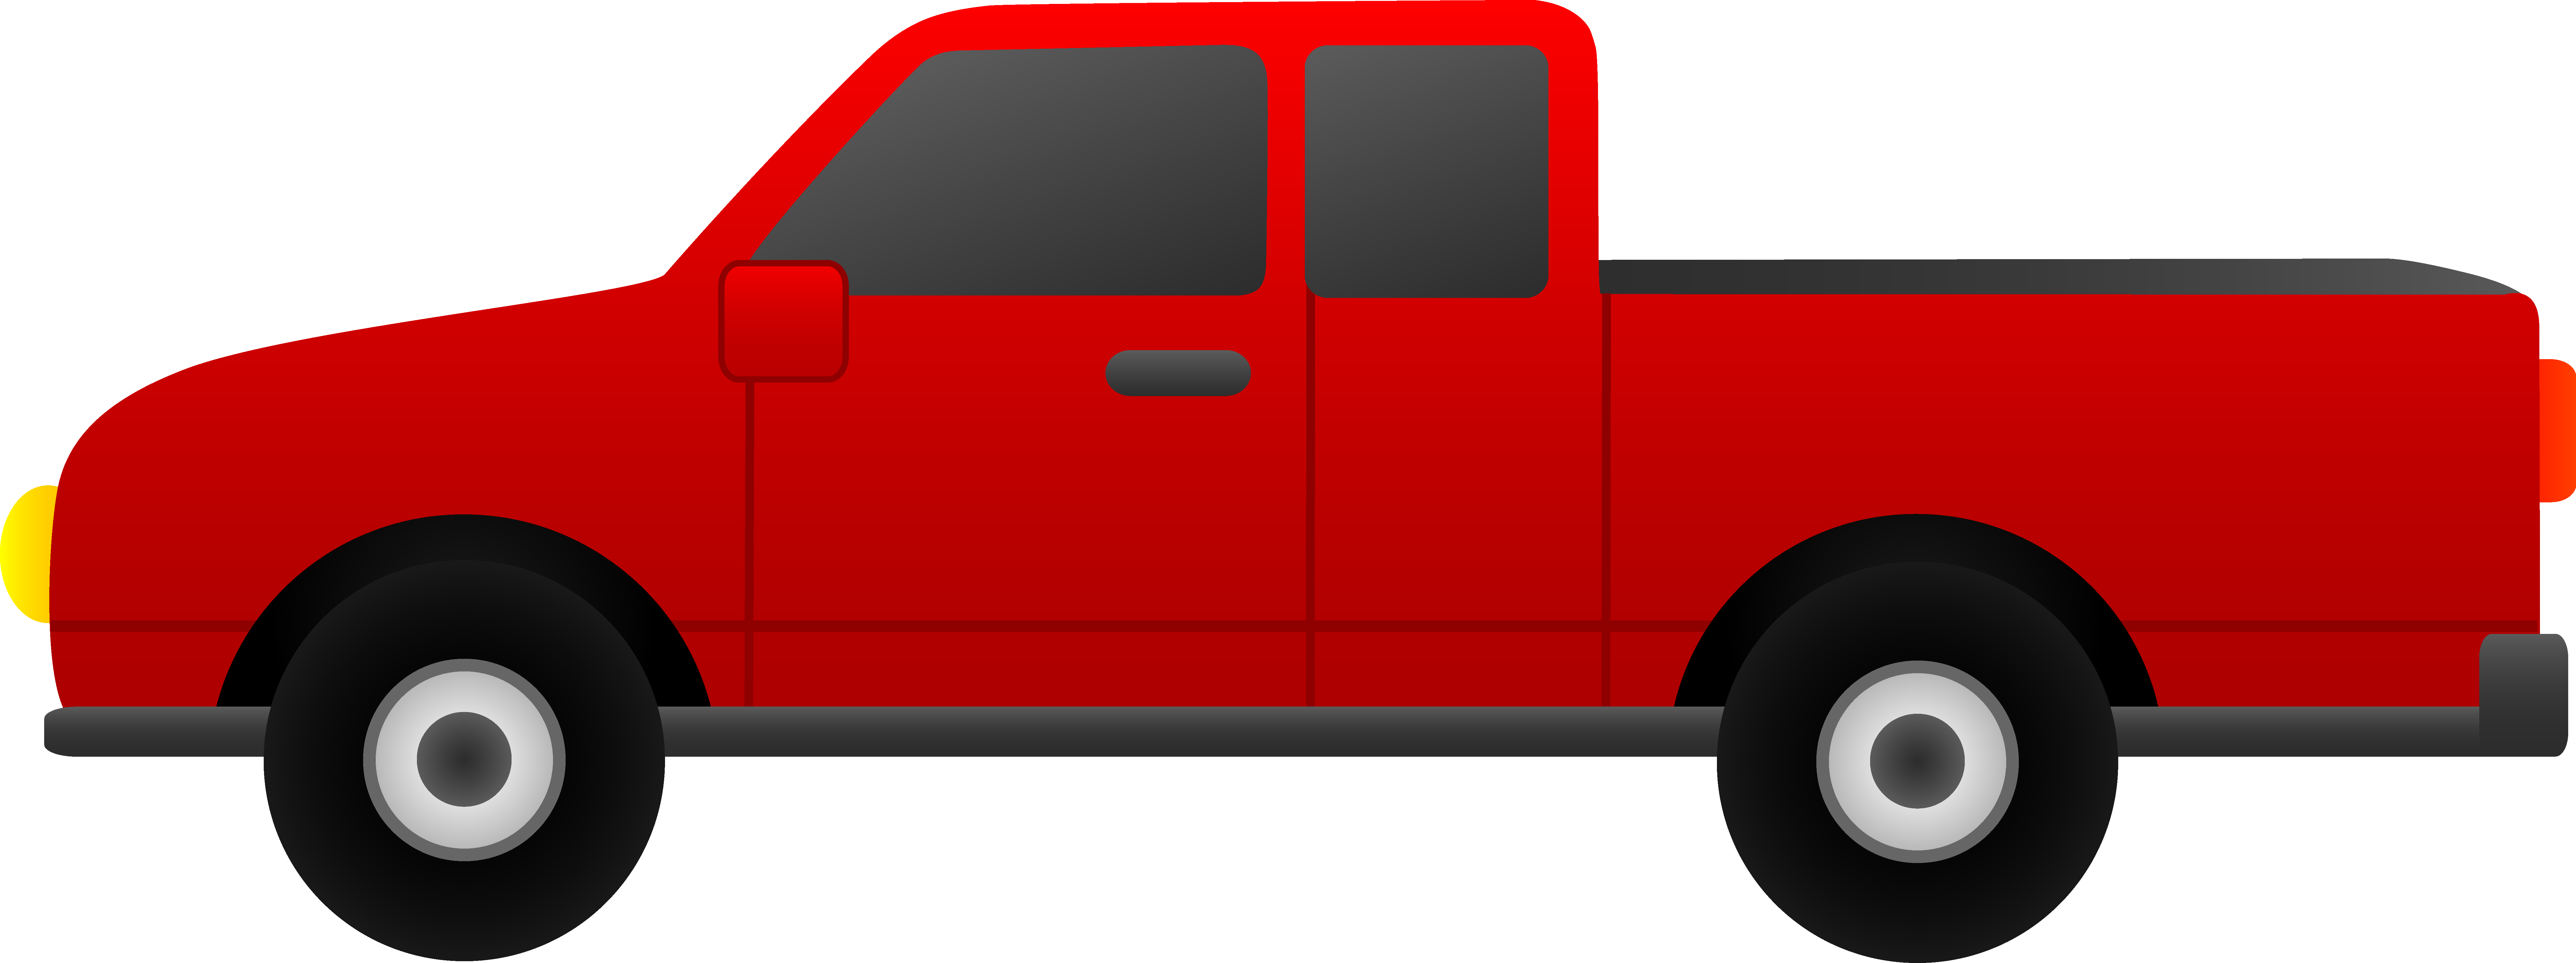 Pickup Truck Clipart Outline | Clipart library - Free Clipart Images